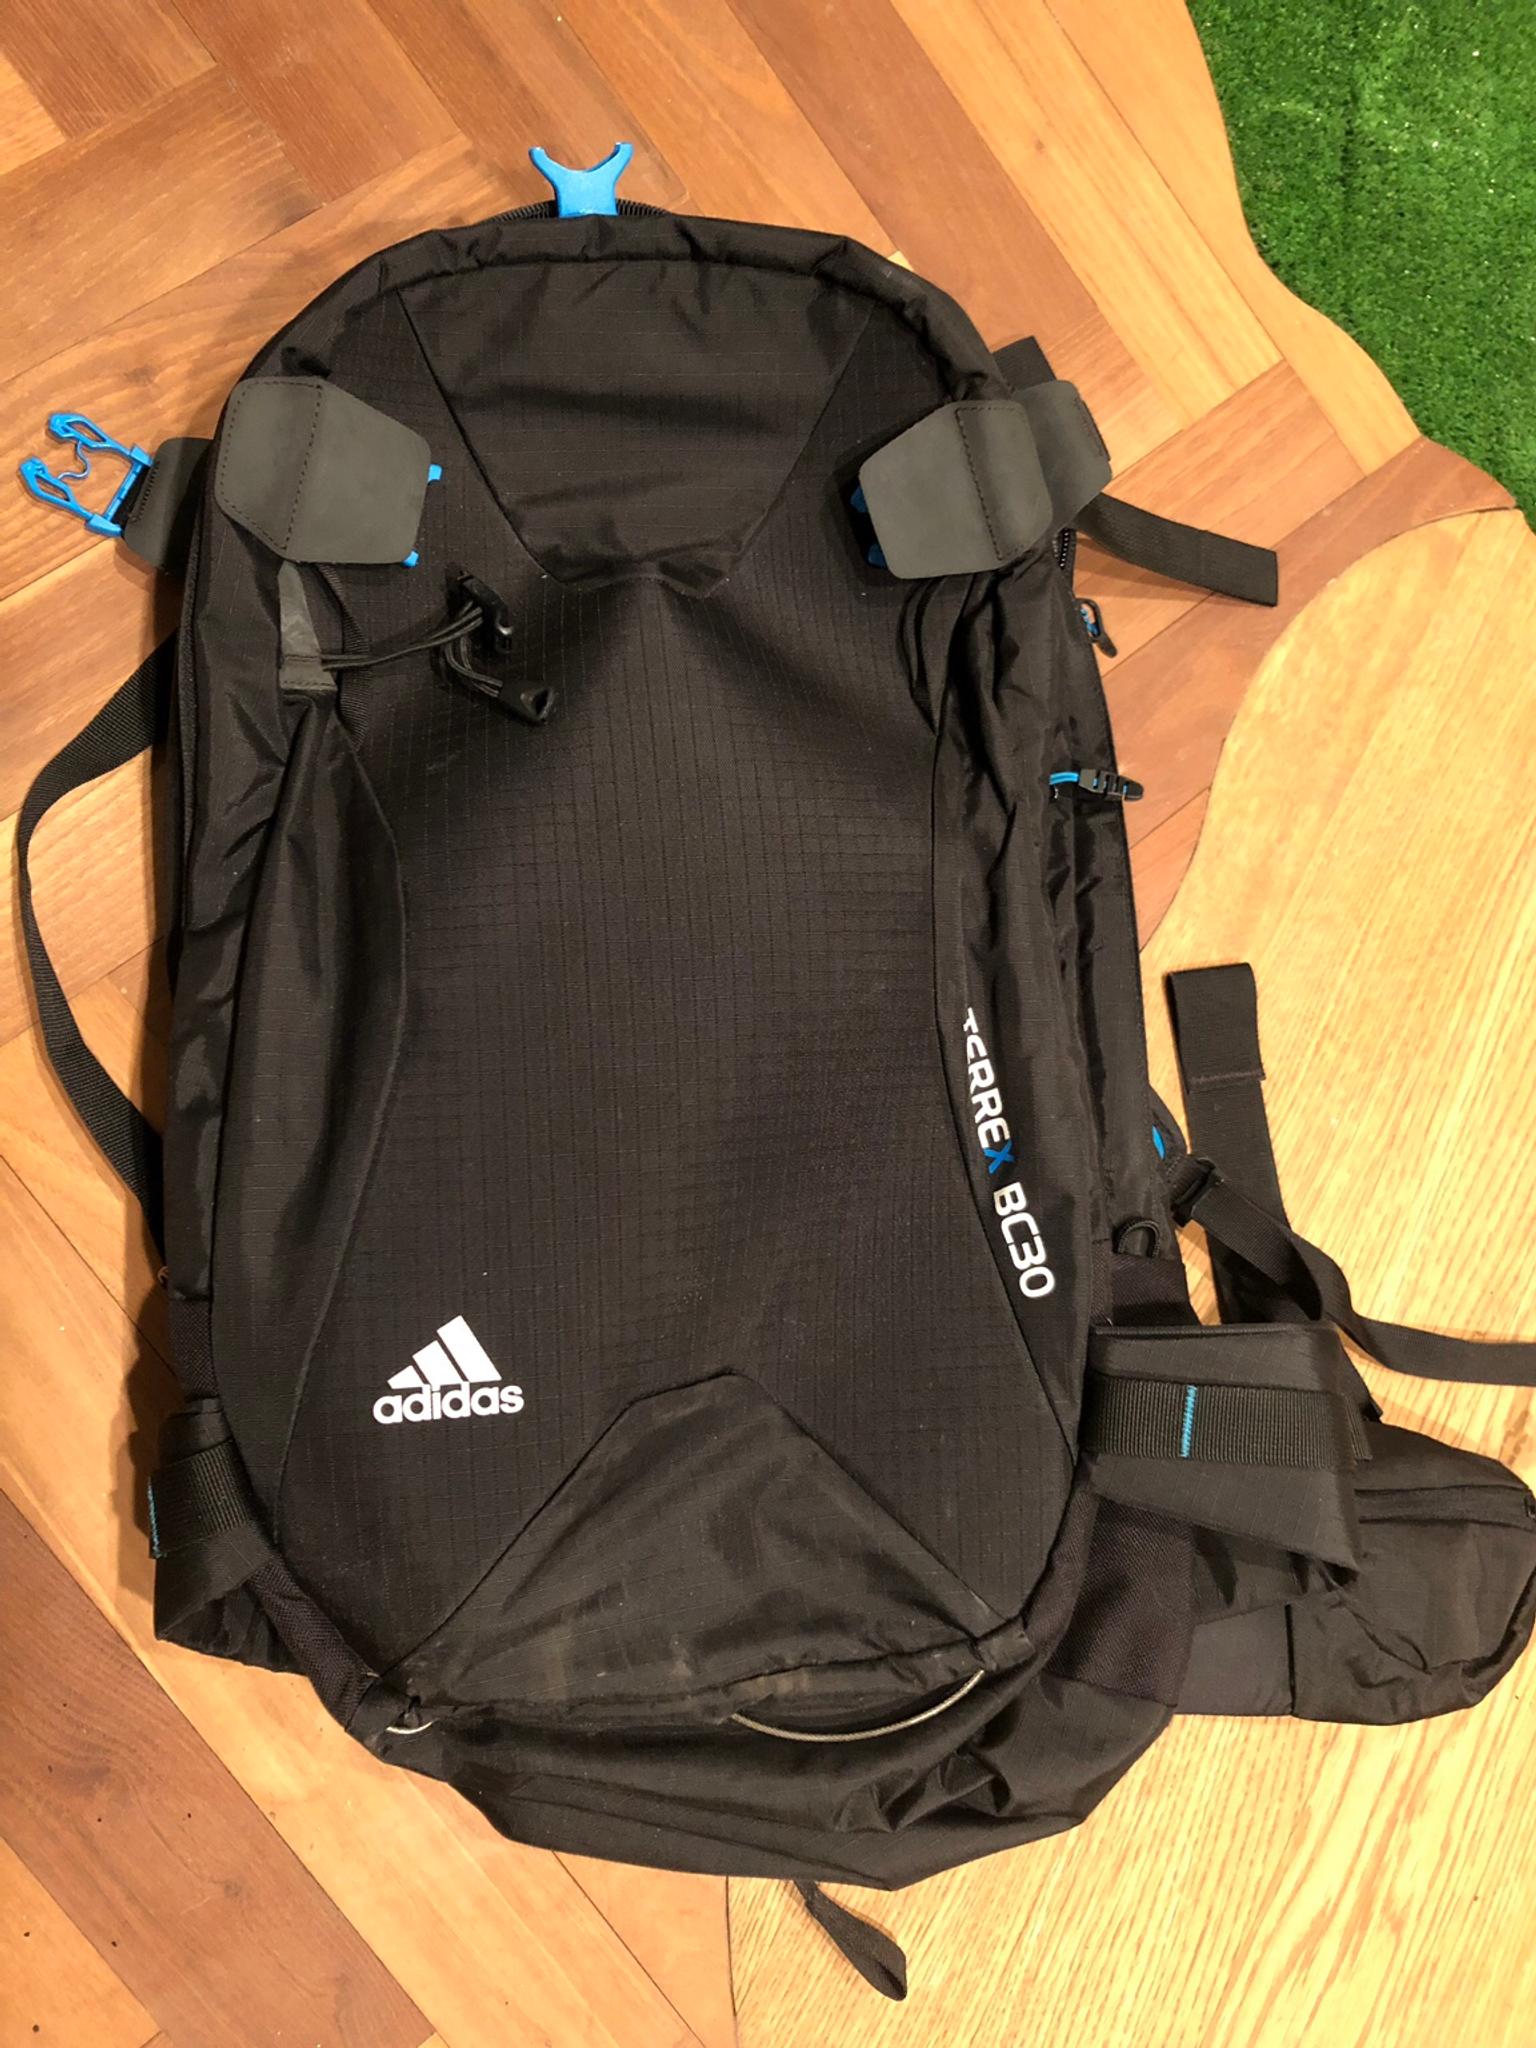 Ruchsack Adidas Terrex BC30 in 4360 Panholz for €50.00 for sale | Shpock